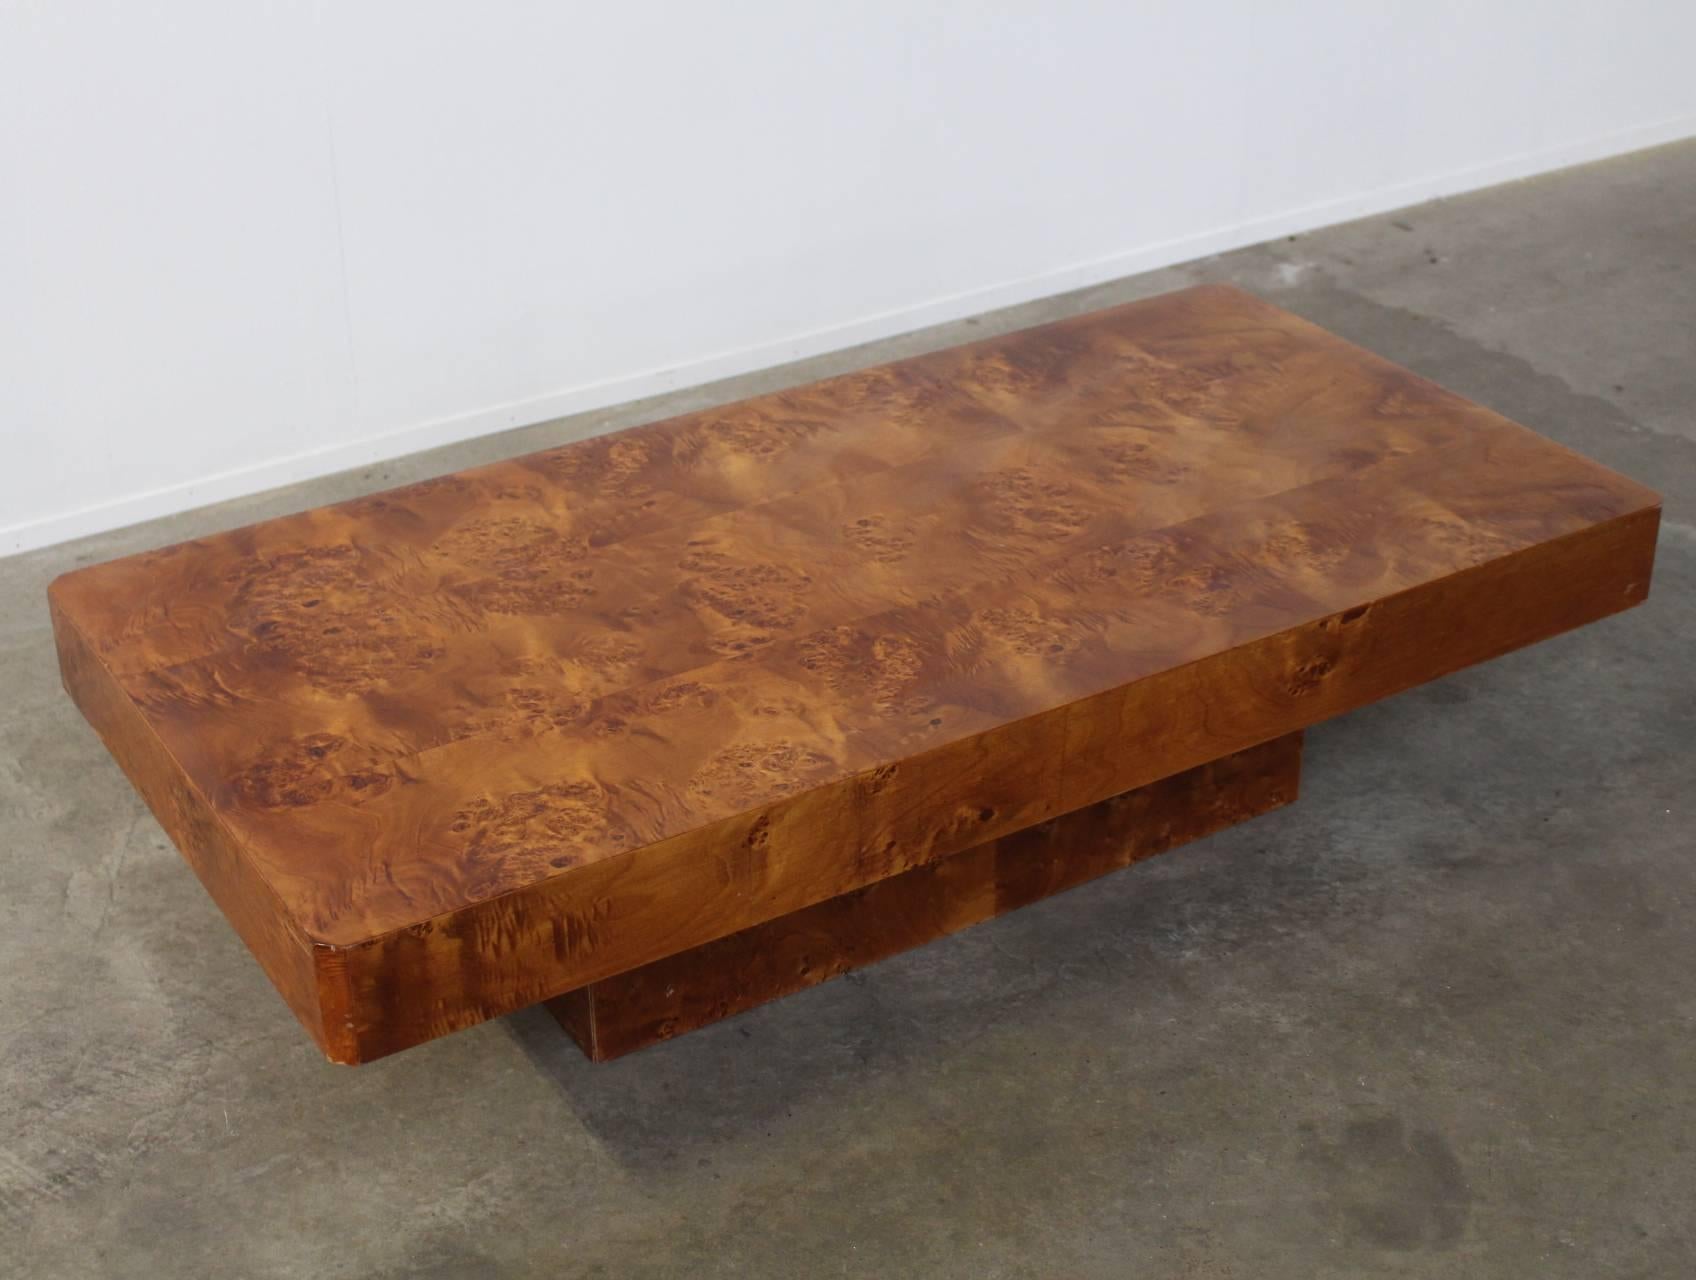 Beautiful chic Hollywood style burl wood coffee or cocktail table with flattened edges in the style of Willy Rizzo. 